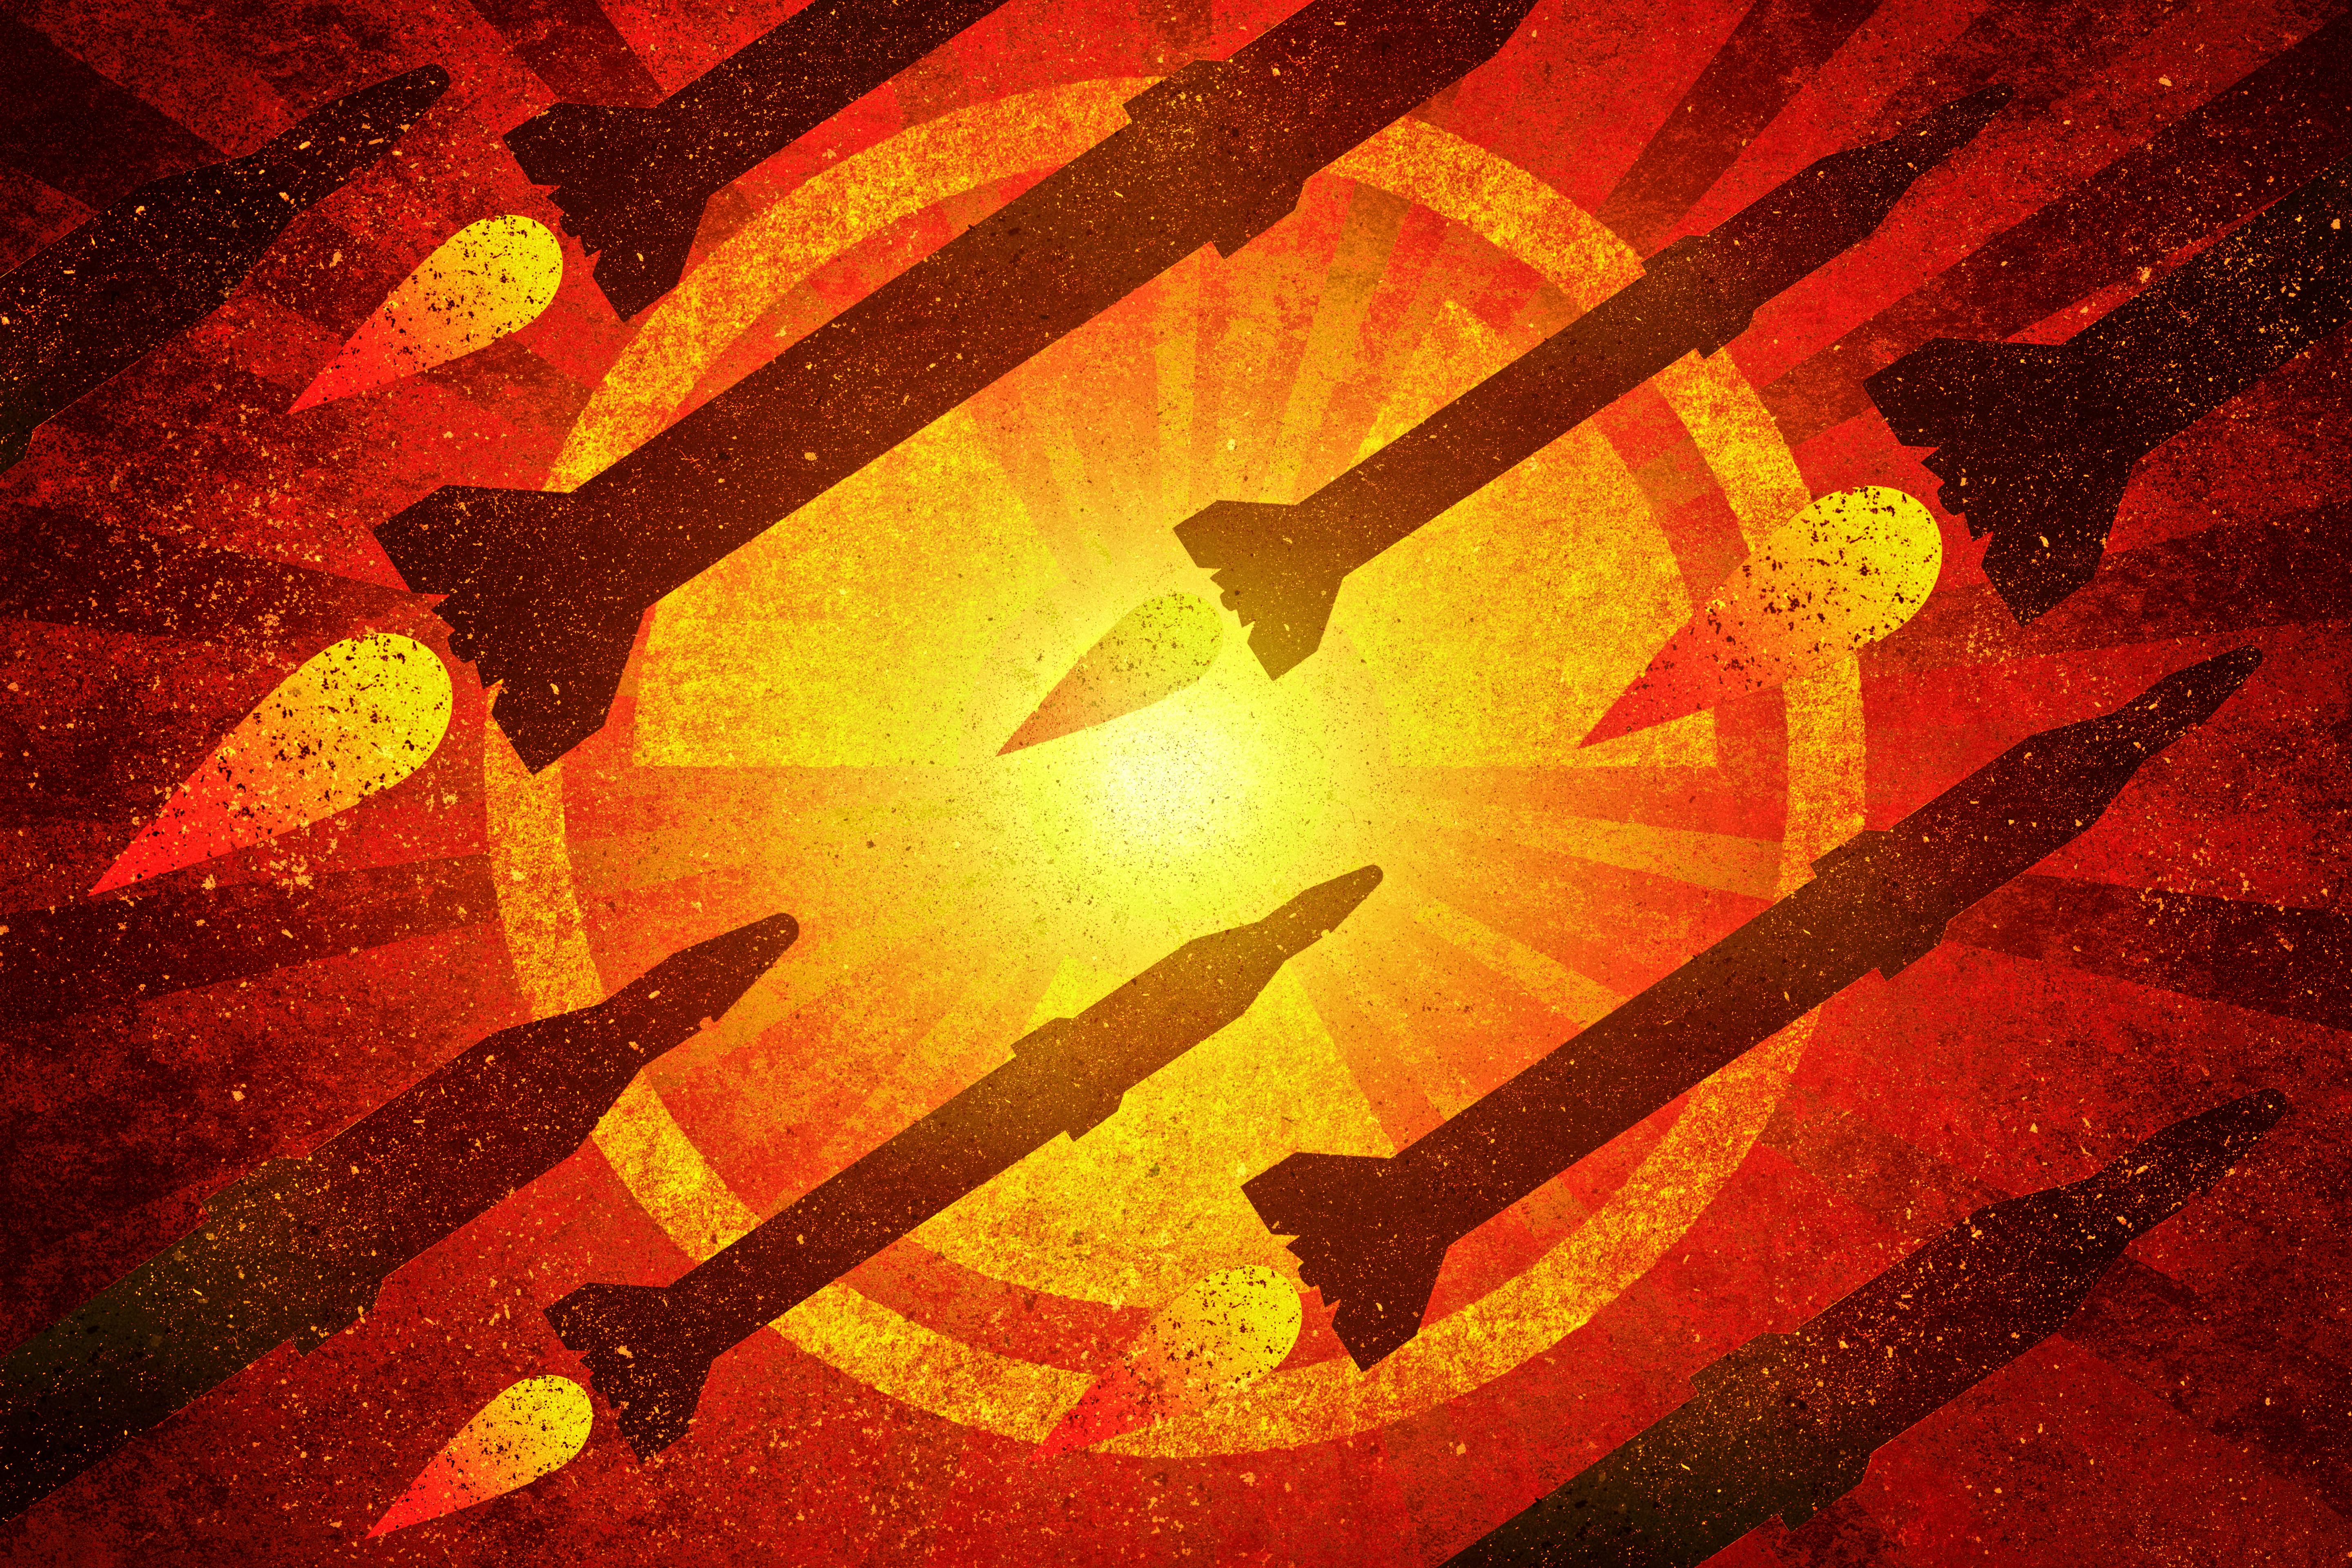 An illustration shows many missiles flying against a background of a yellow and red explosion.